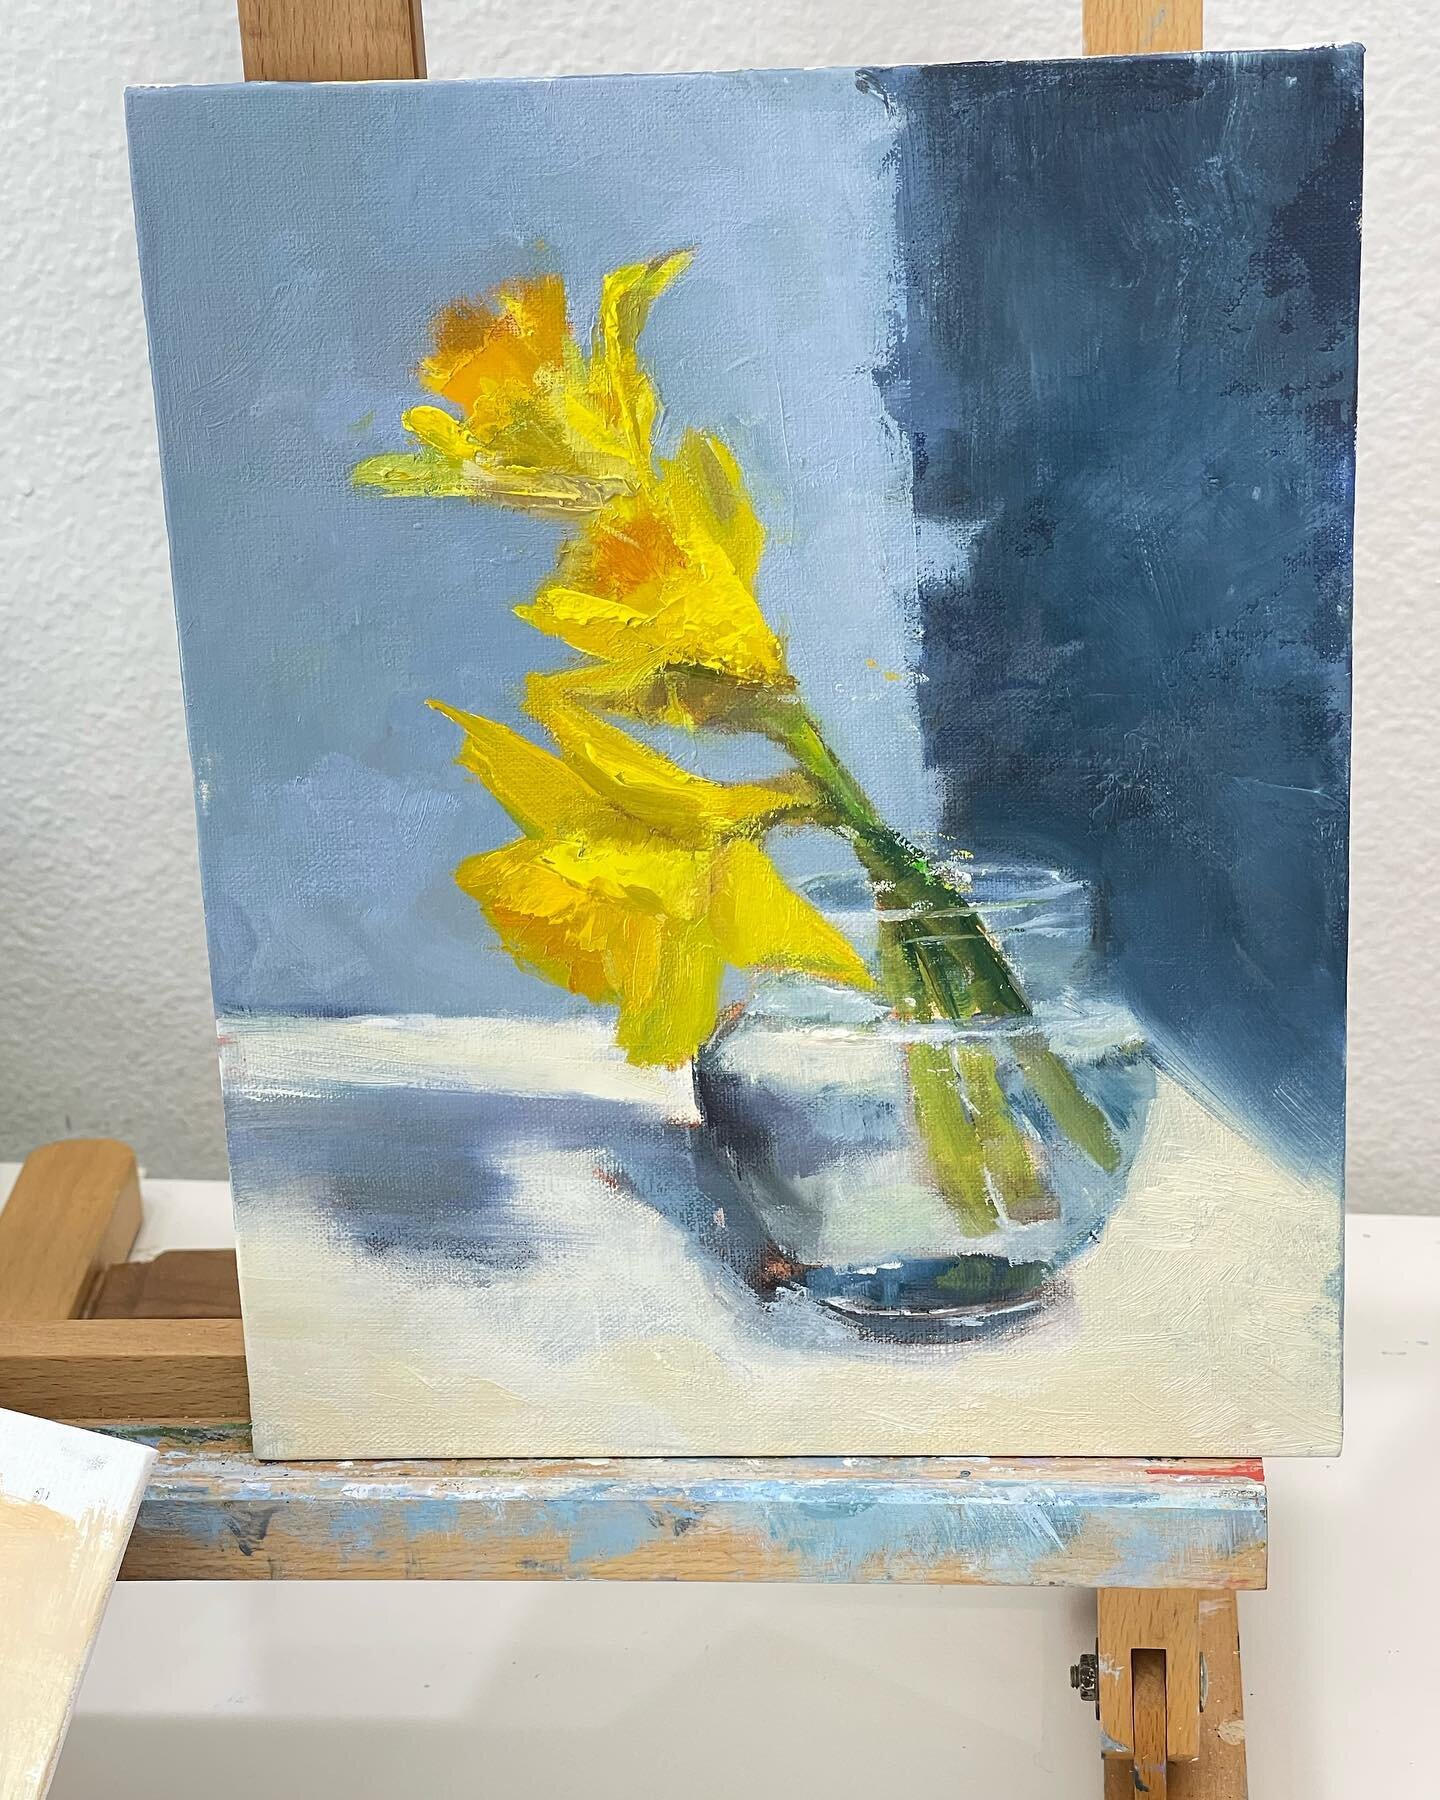 Thinking daffodil&rsquo;s. My small offering of 3 daffies for Nantucket&rsquo;s Daffodil Weekend Festivities #daffodilfestival #nantucket #stilllifepainting #observationalpainting #creativeuprising #ackartists